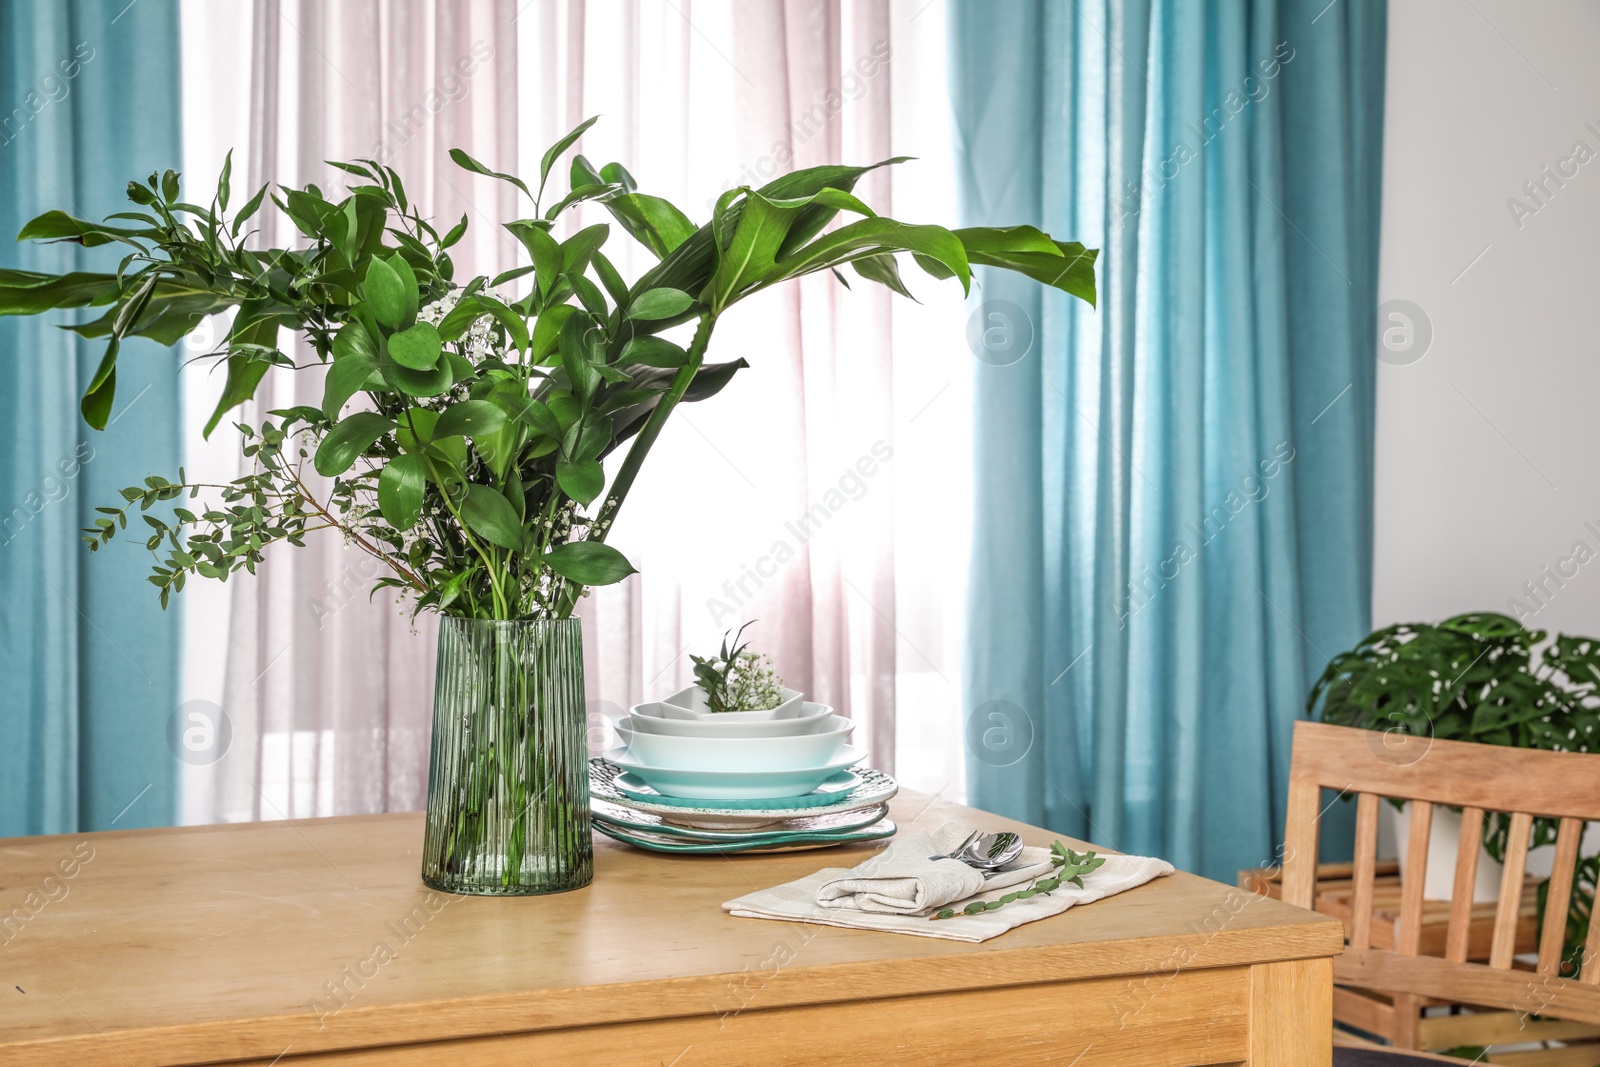 Photo of Dishware and plants on wooden table near window with elegant curtains